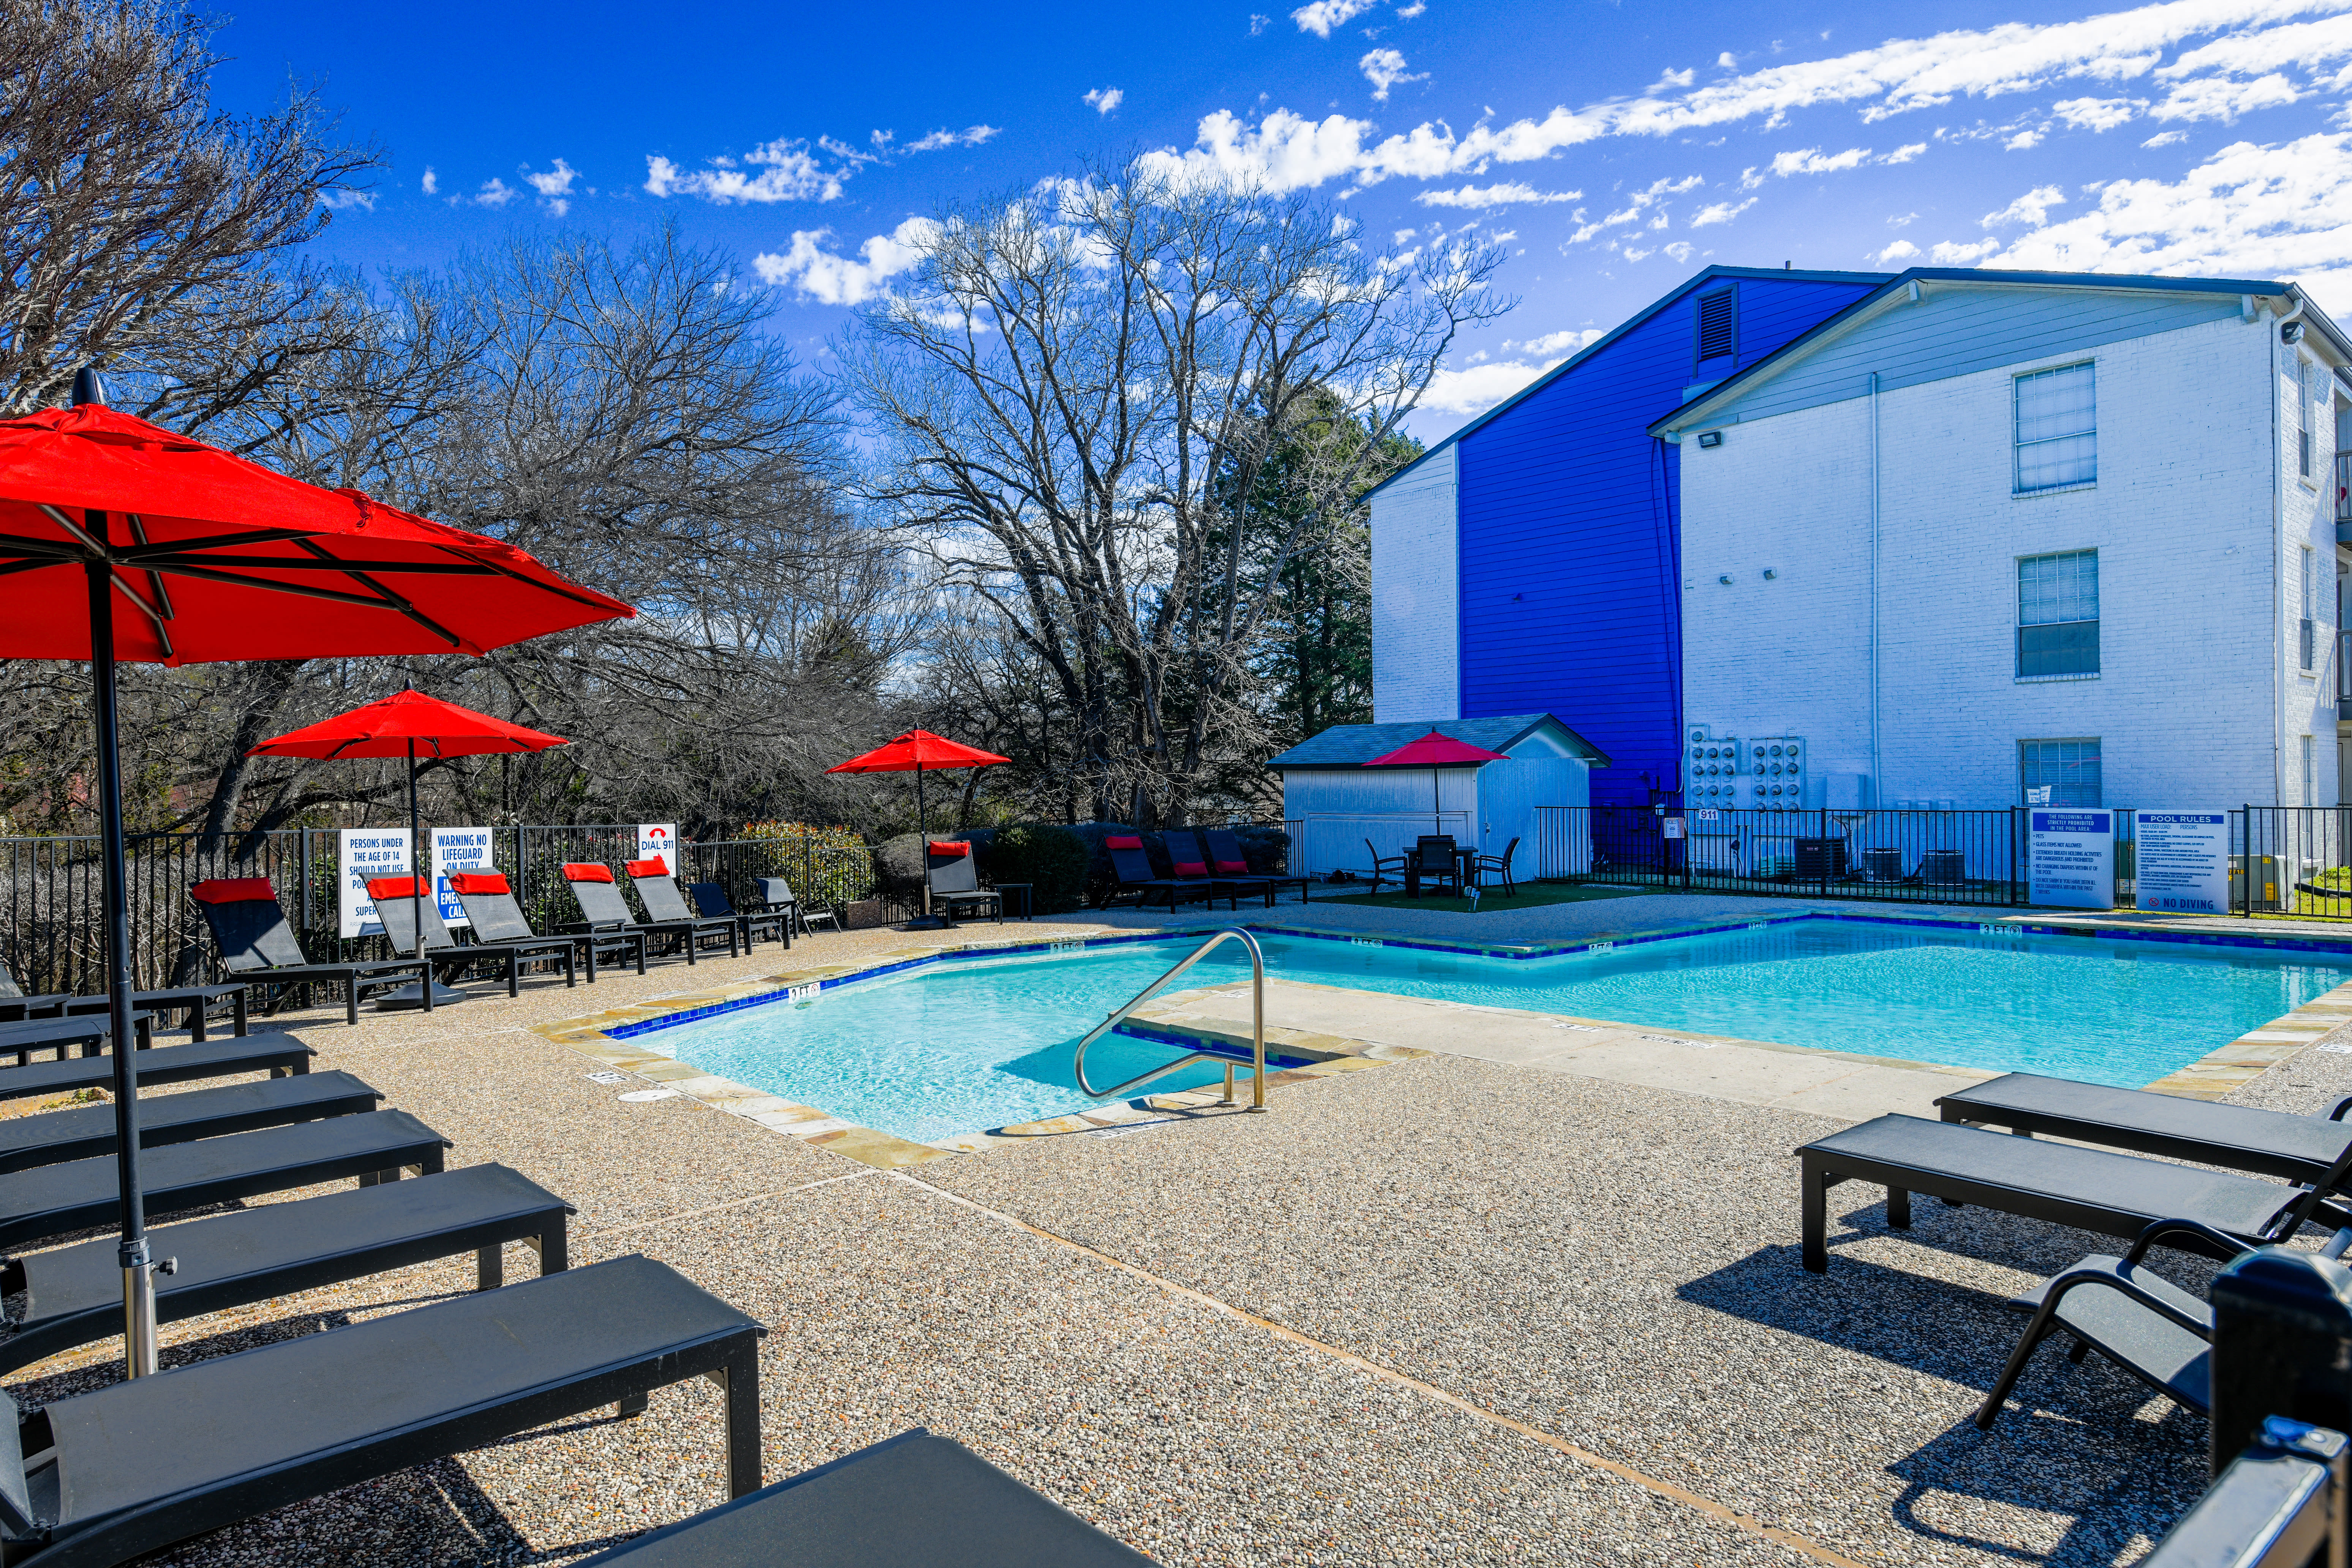 Pool view and red umbrellas at The Broadway in Garland, Texas